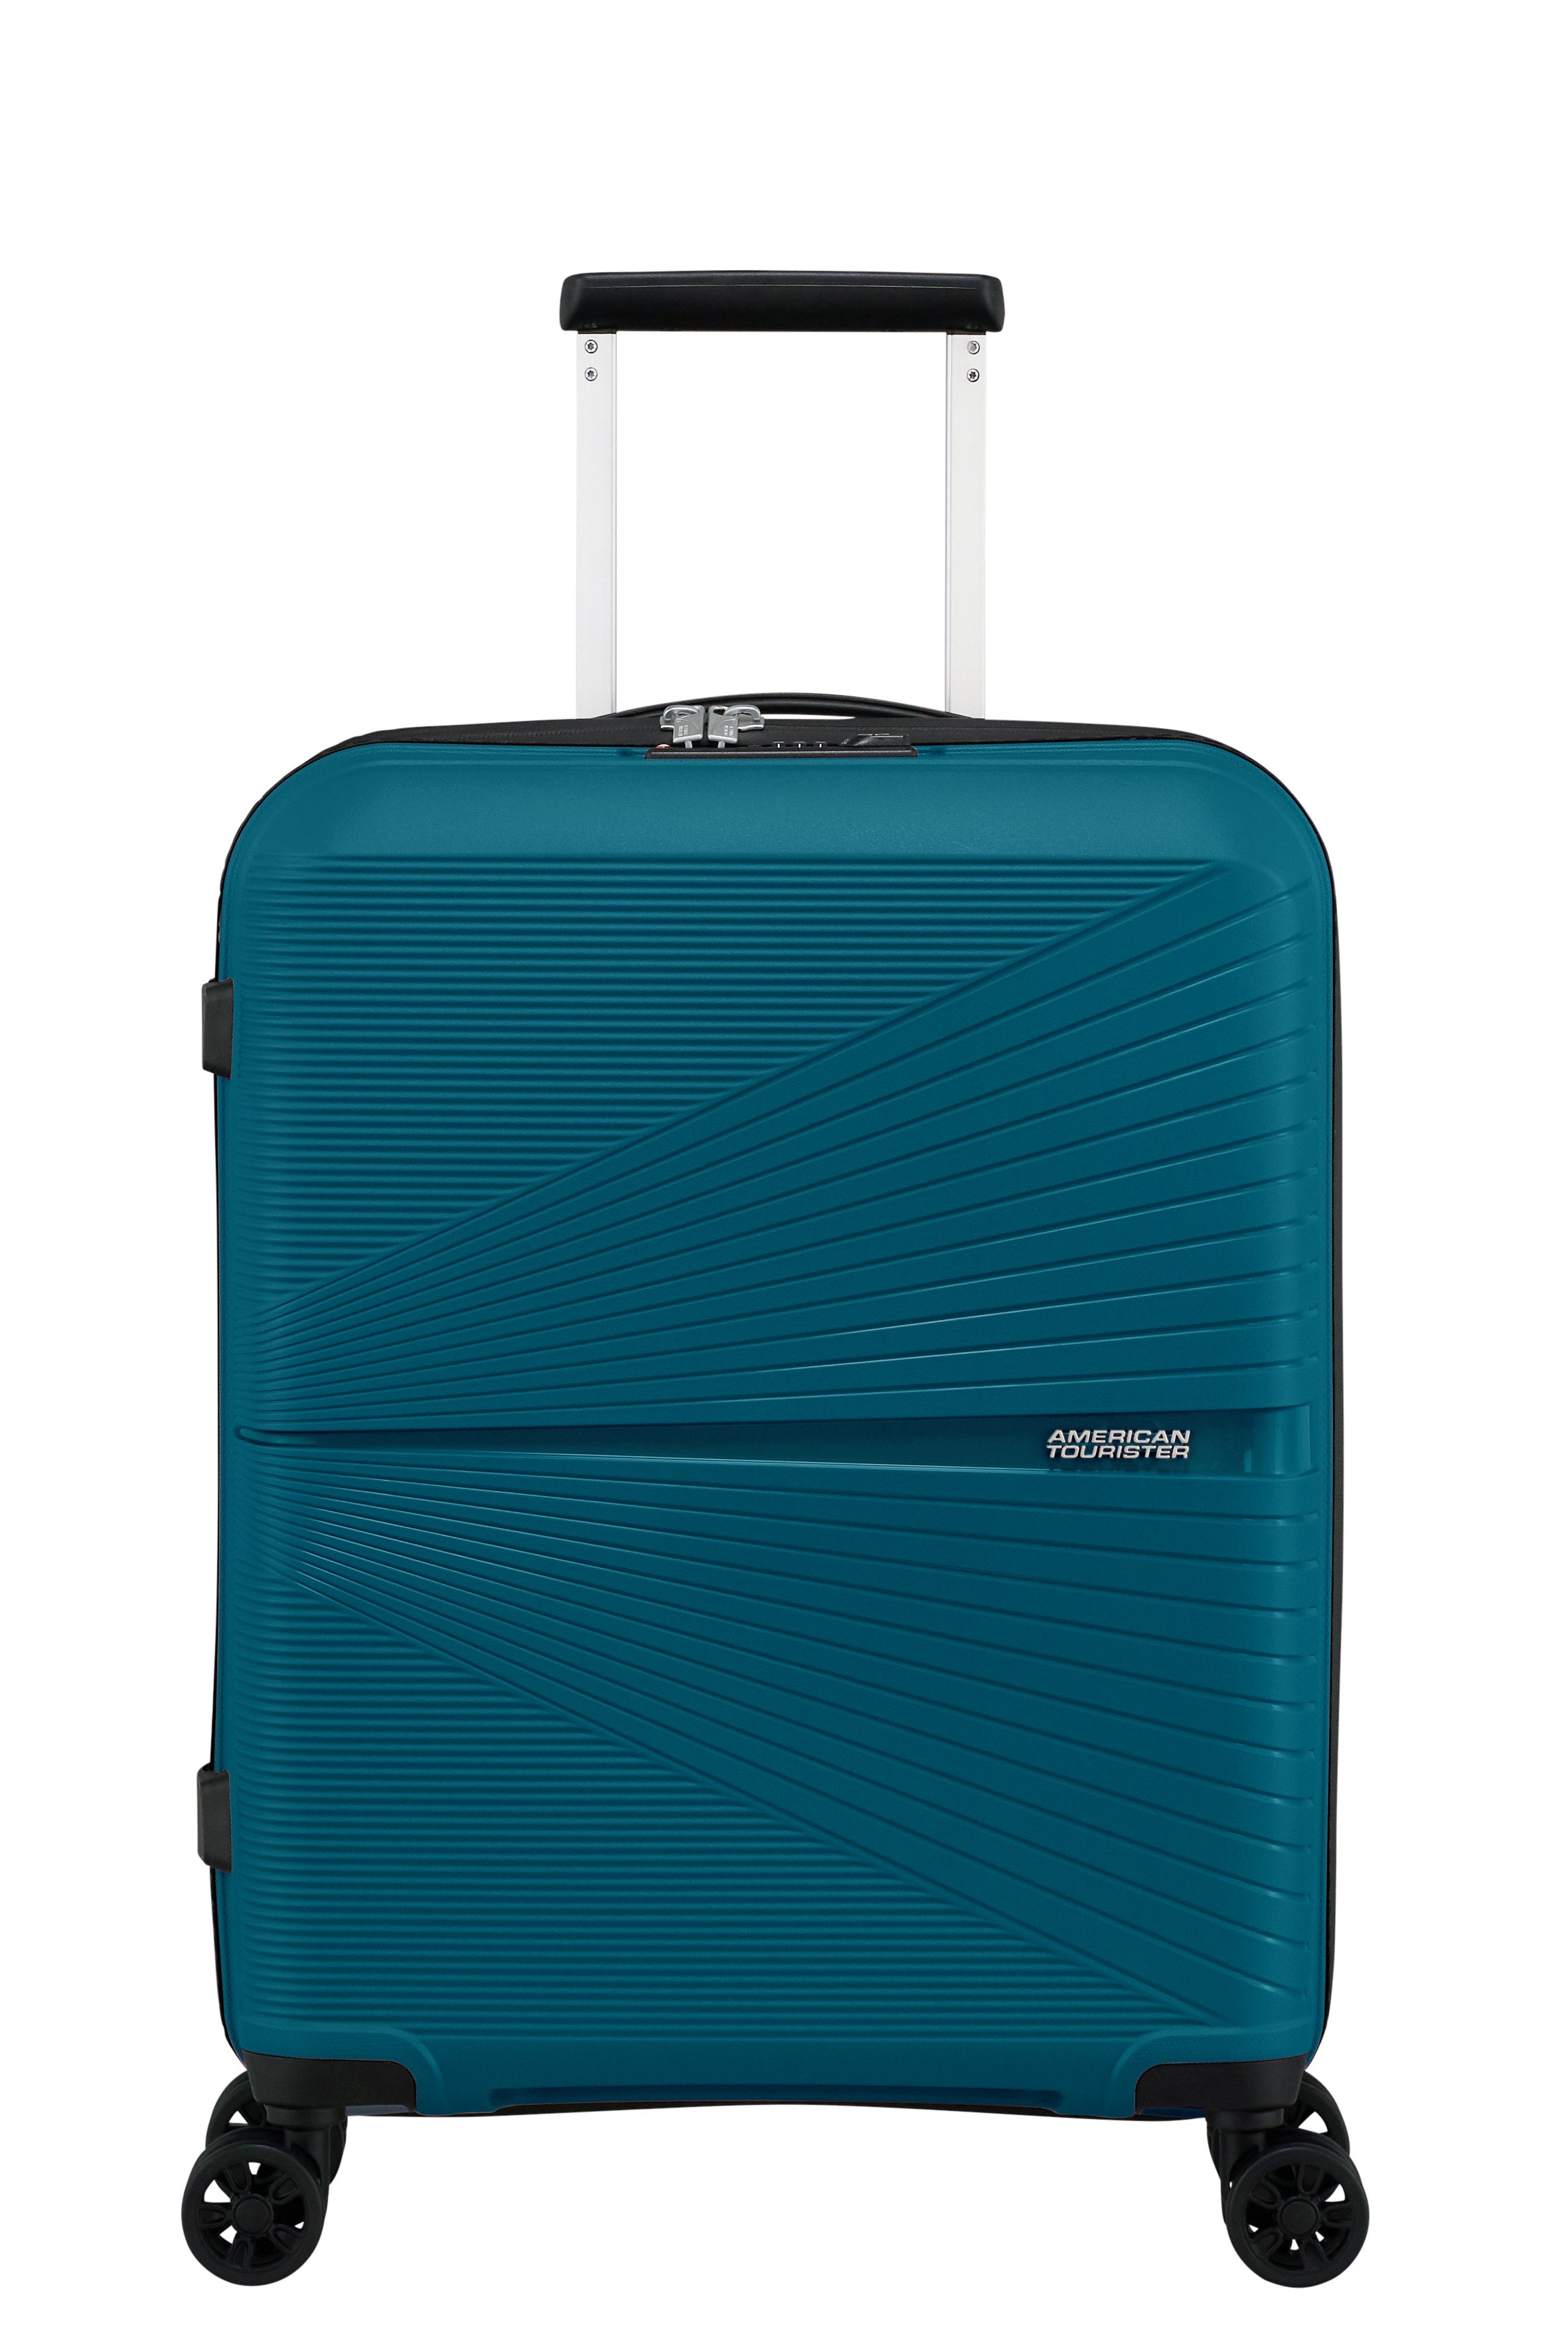 American Tourister - Airconic 55cm Small Suitcase - Deep Ocean - 0